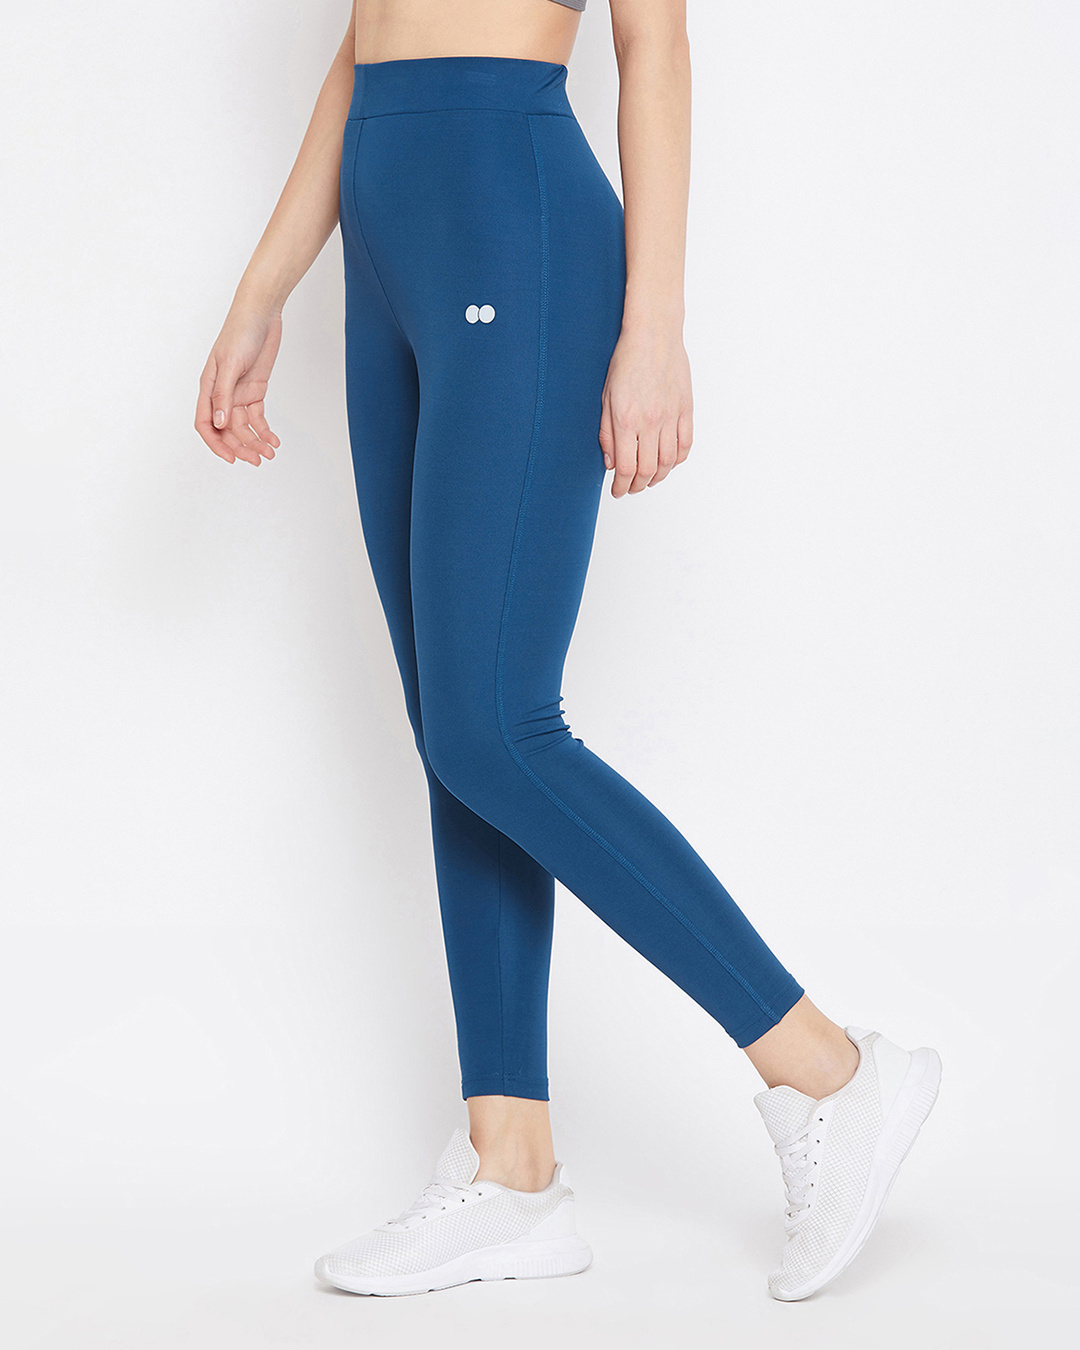 Shop Activewear Ankle Length Tights In Teal Blue-Back